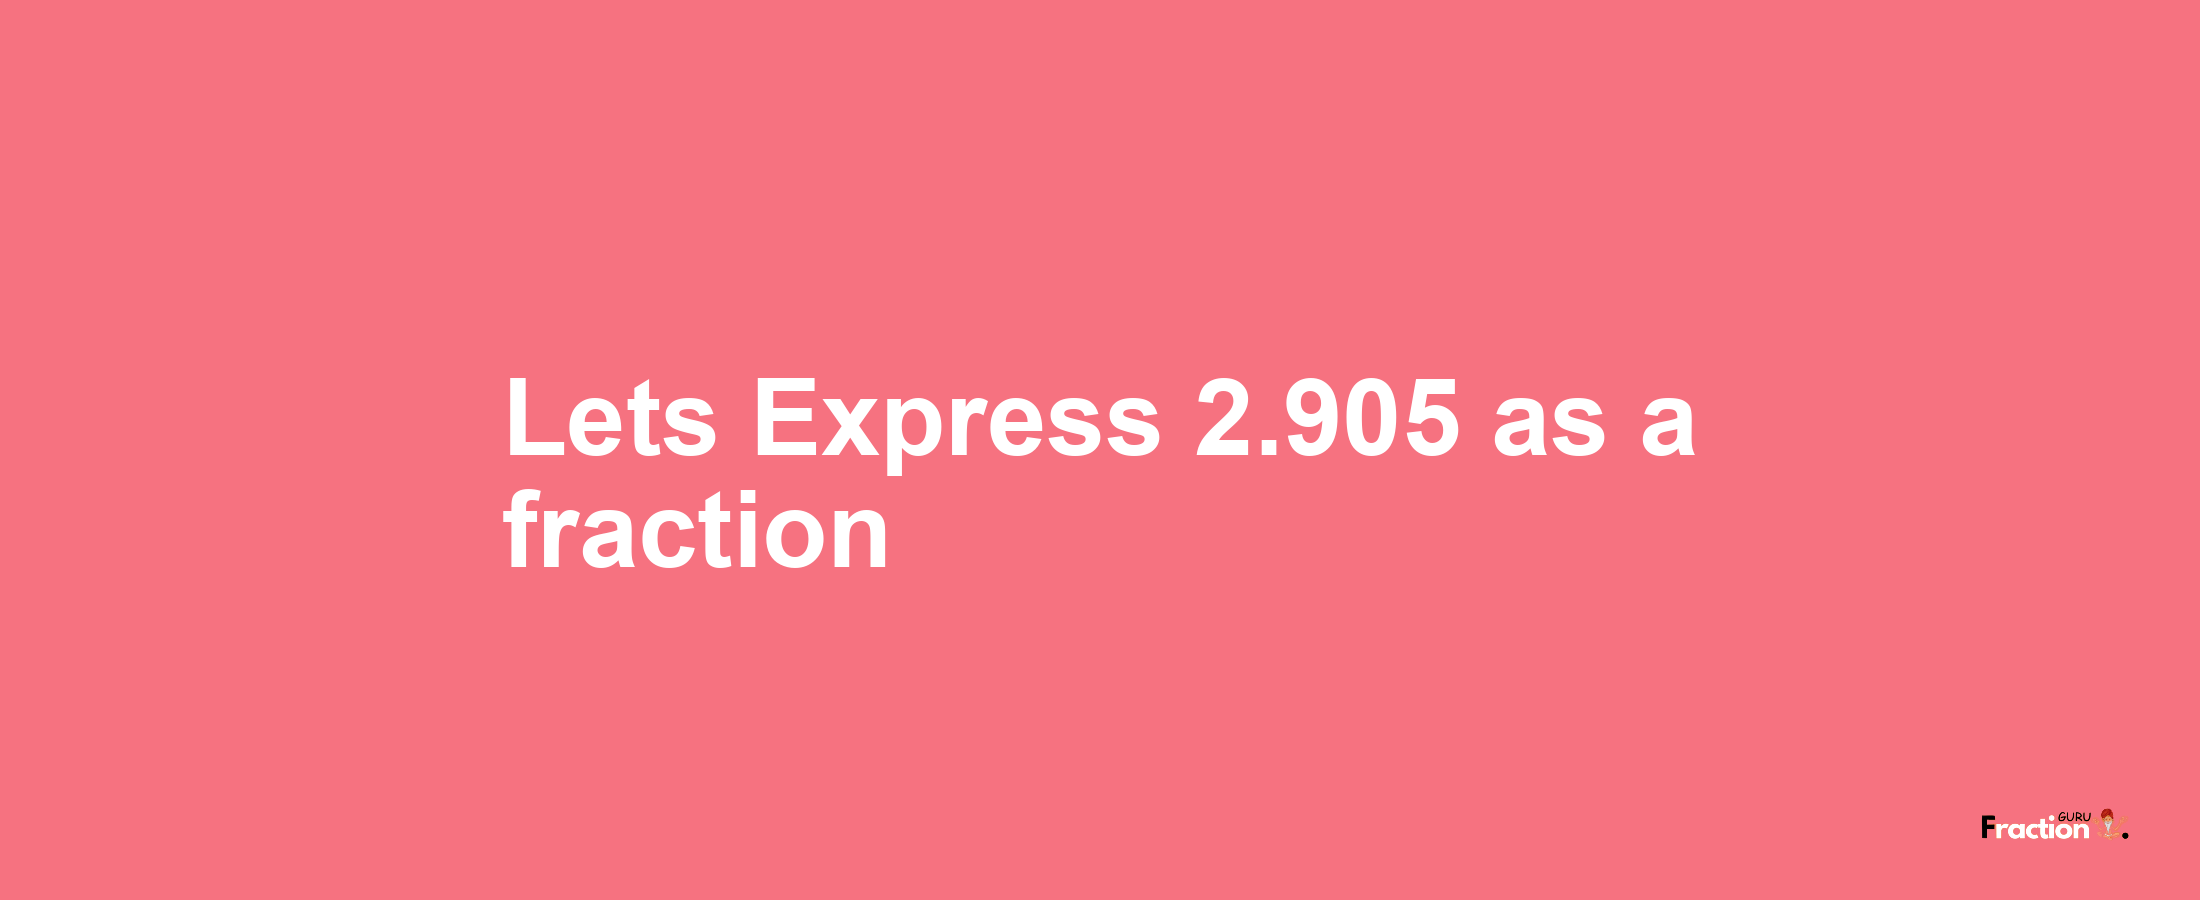 Lets Express 2.905 as afraction